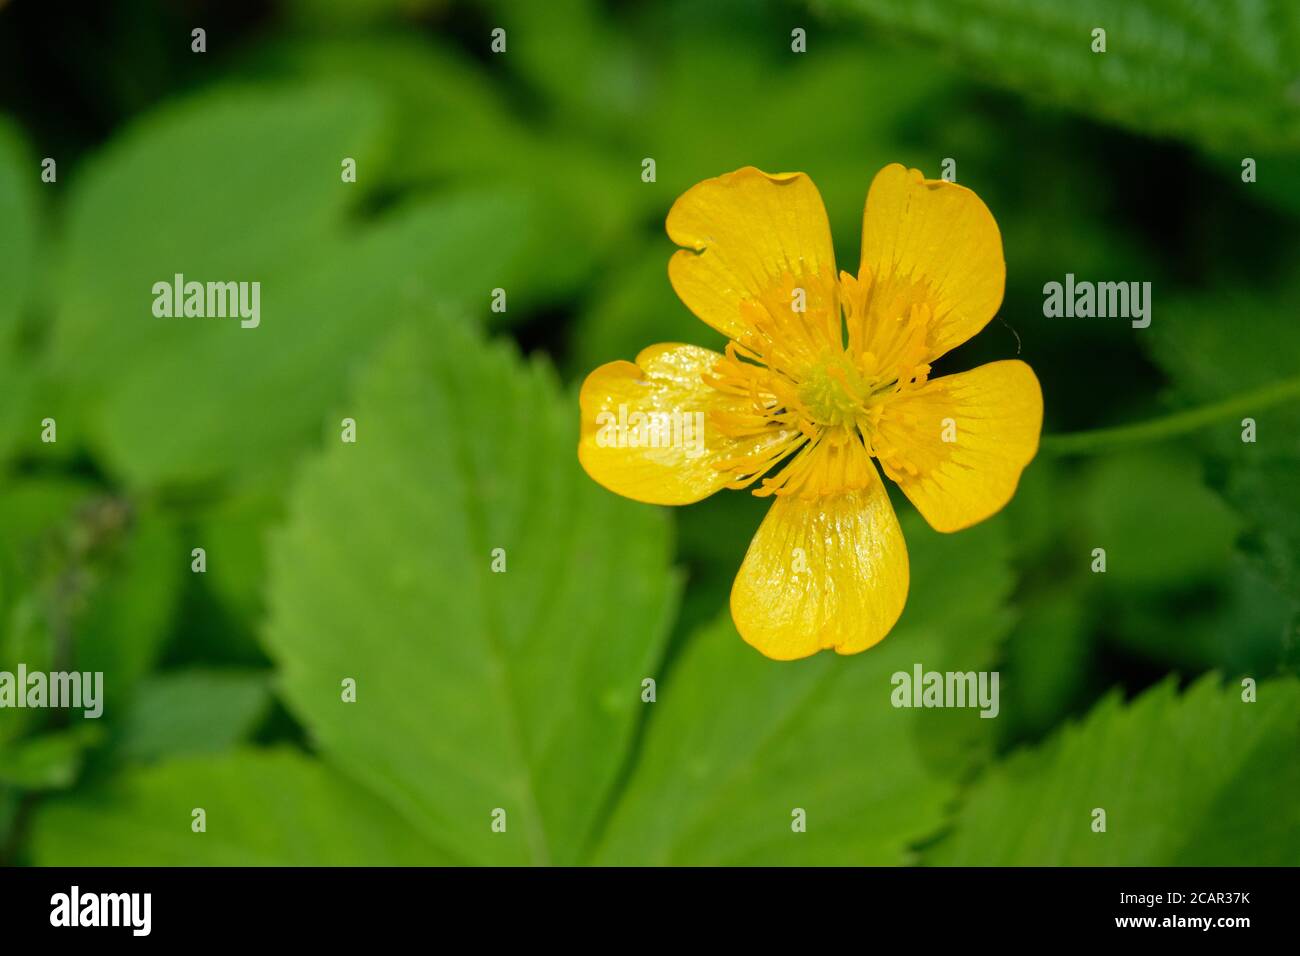 Single Creeping Buttercup(Rannunculus repens) flower against fuzzy leaves background, Bialowieza forest, Poland, Europe Stock Photo